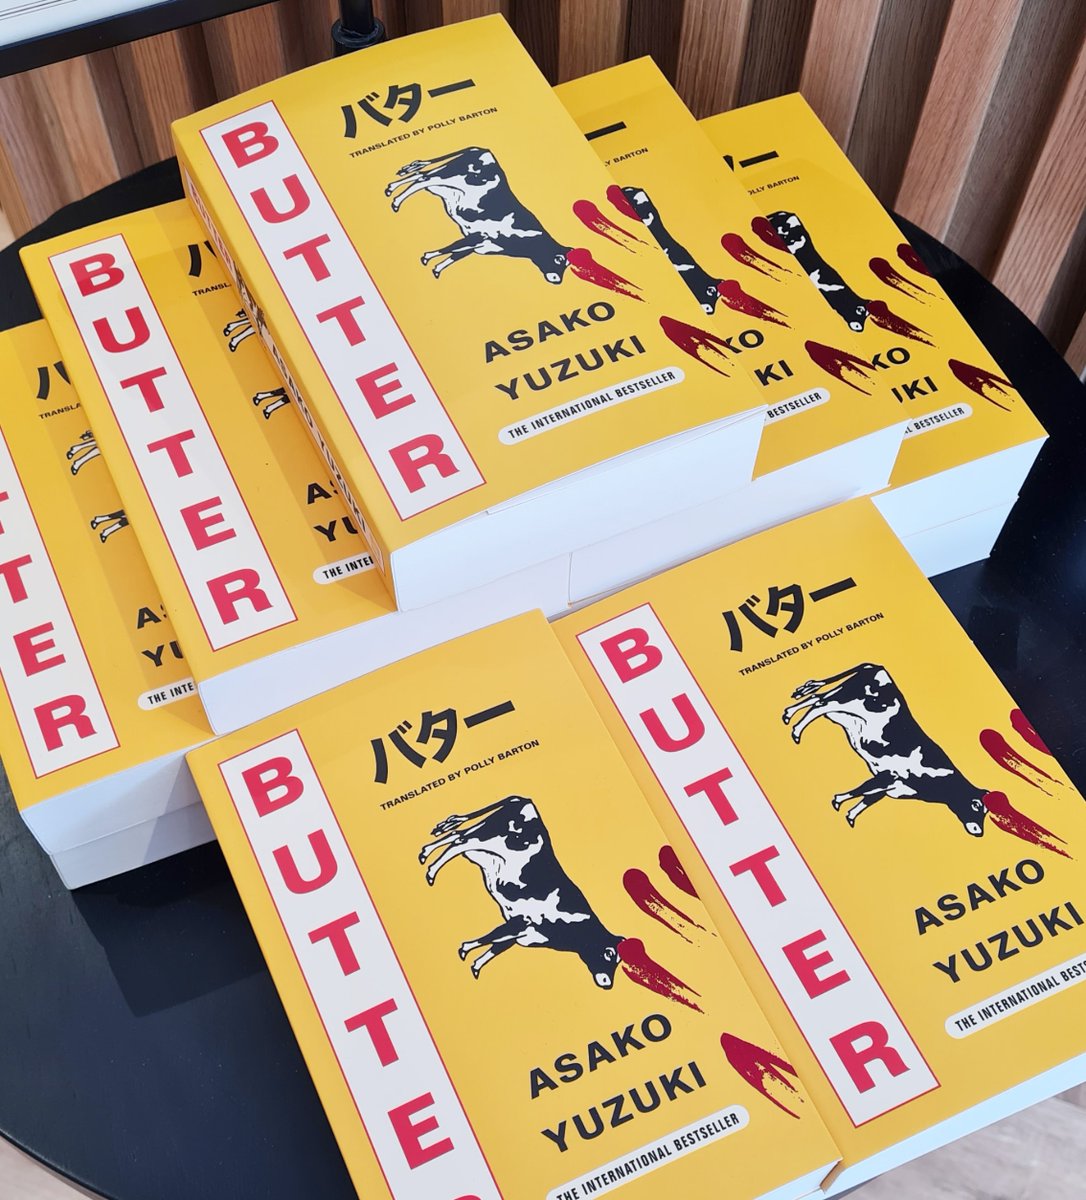 Butter by Asako Yuzuki is one of our current store favourites. Inspired by the real life case of a convicted con woman, we've been completely gripped. #Butter #WaterstonesBedford #ChooseBookshops